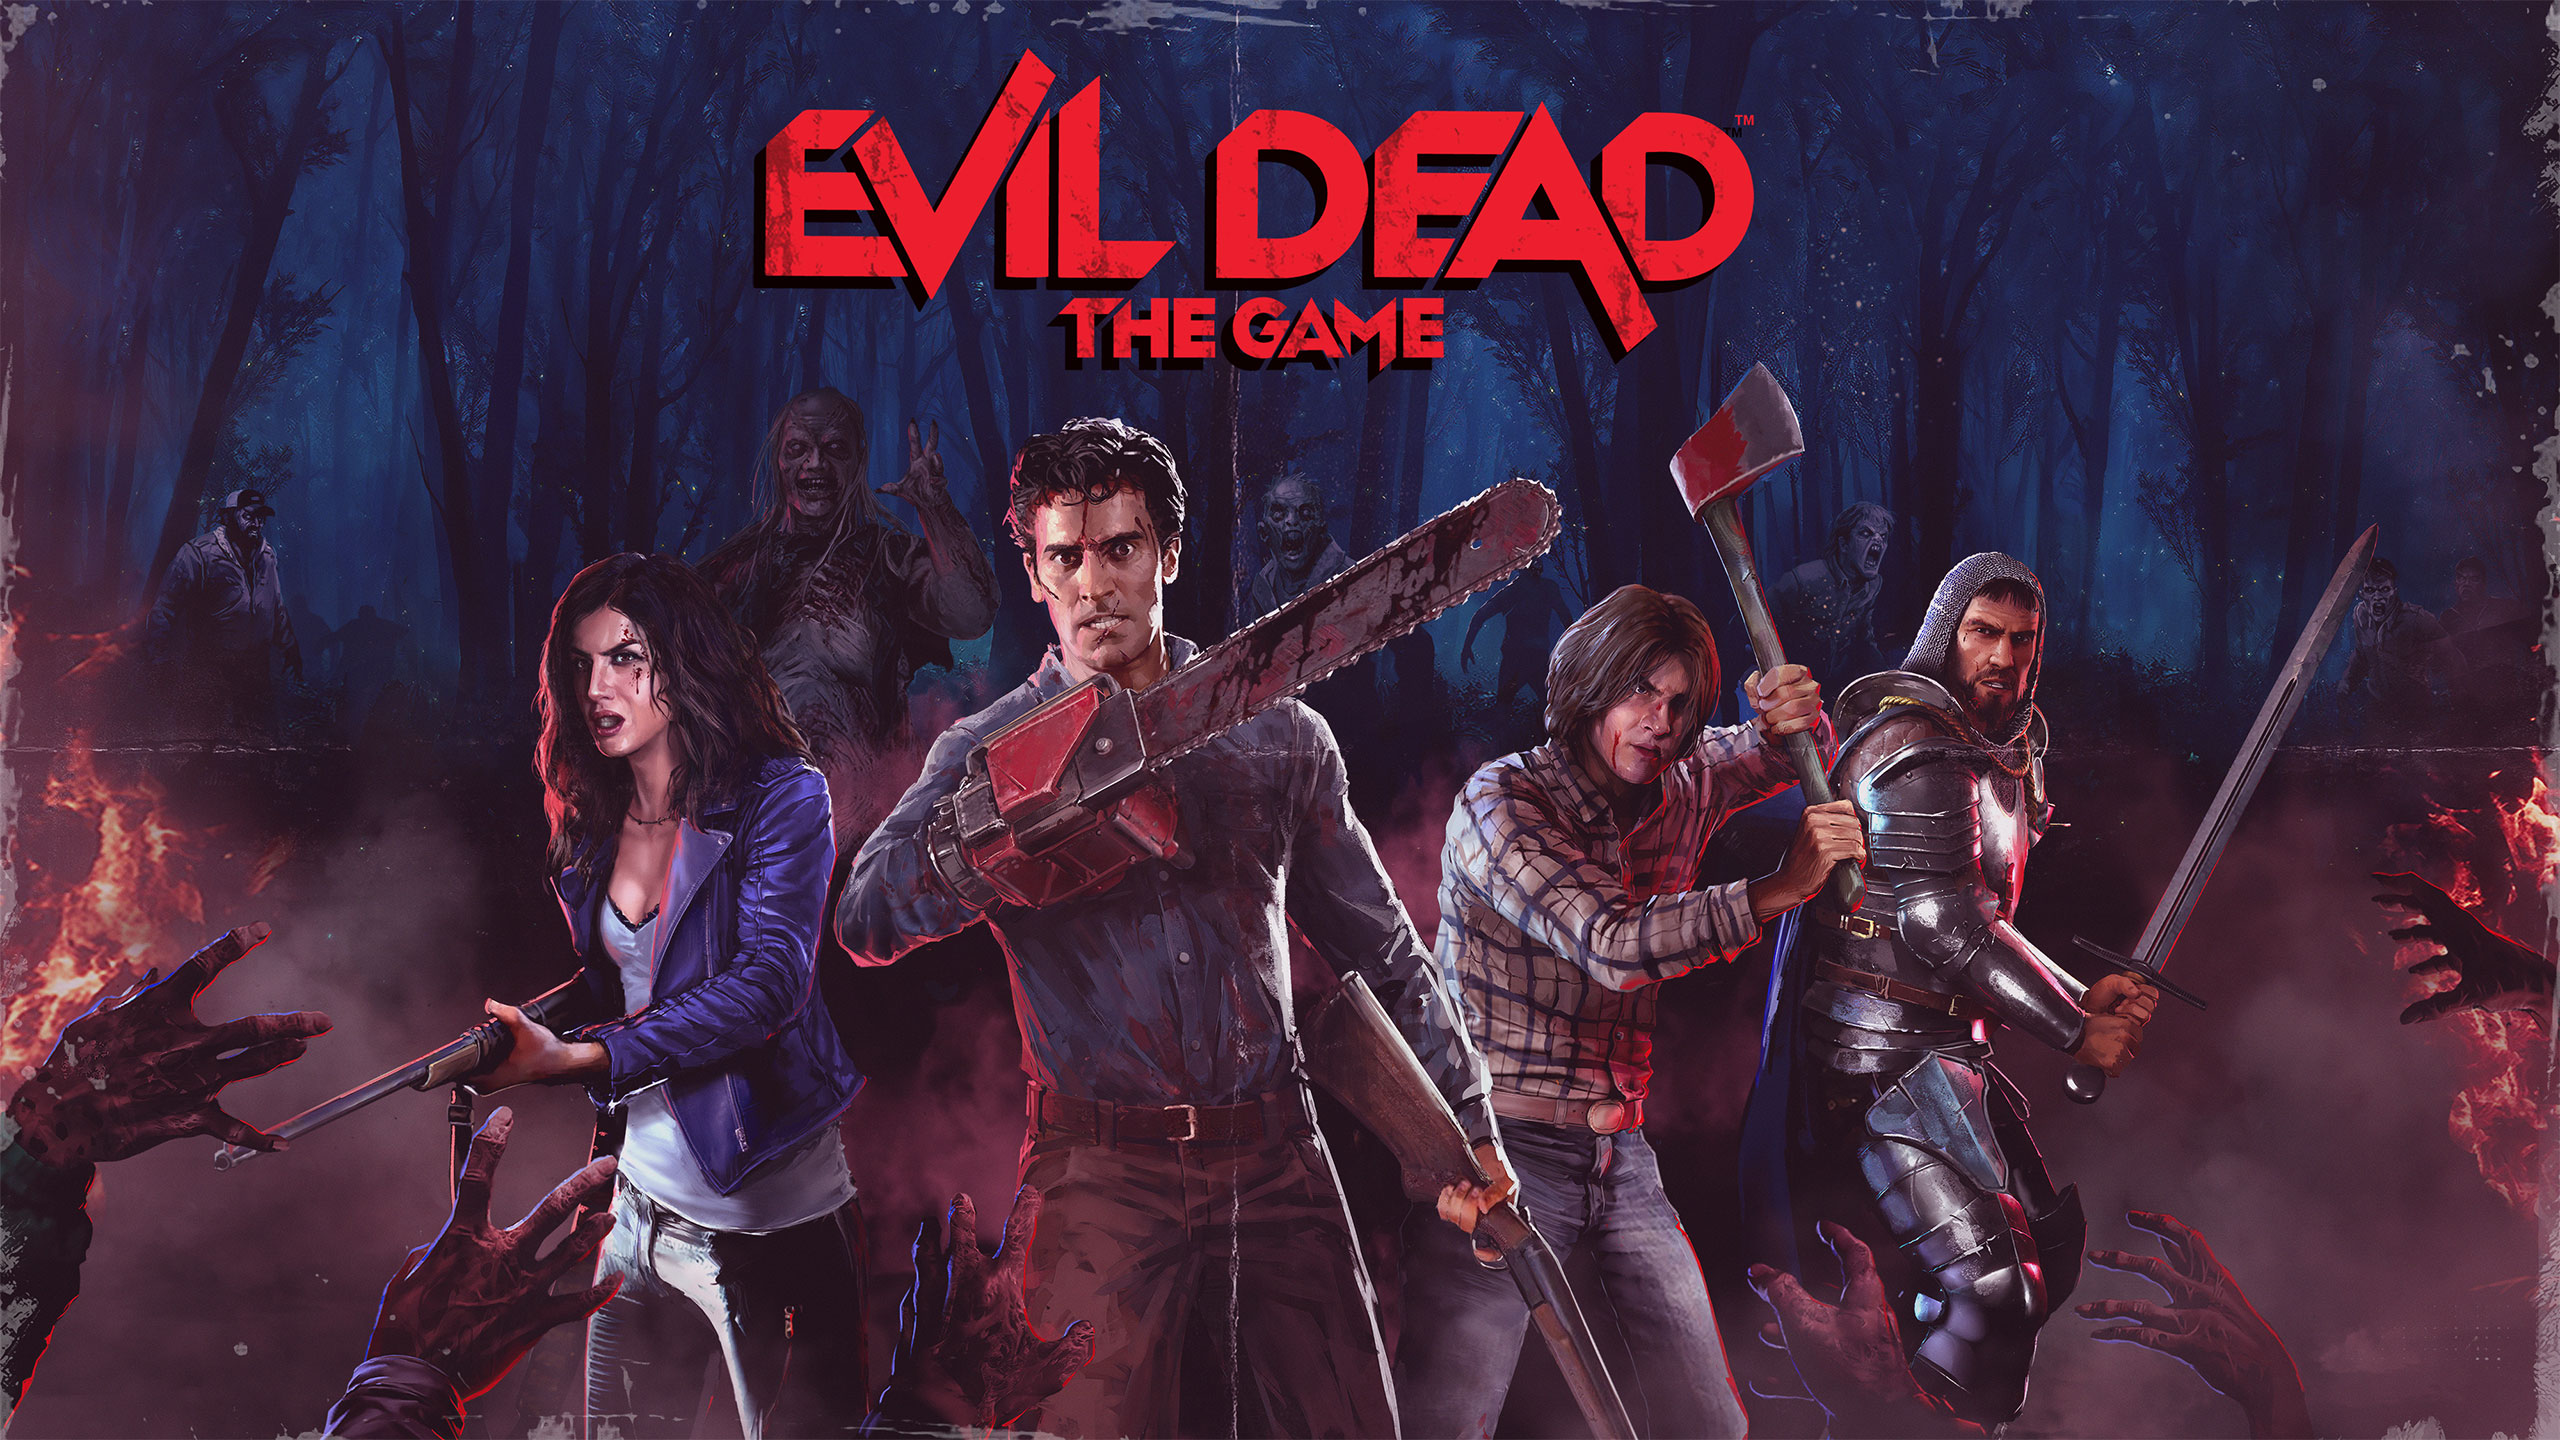 ‘Evil Dead: The Game’ Offers Action, Humor, And Horror